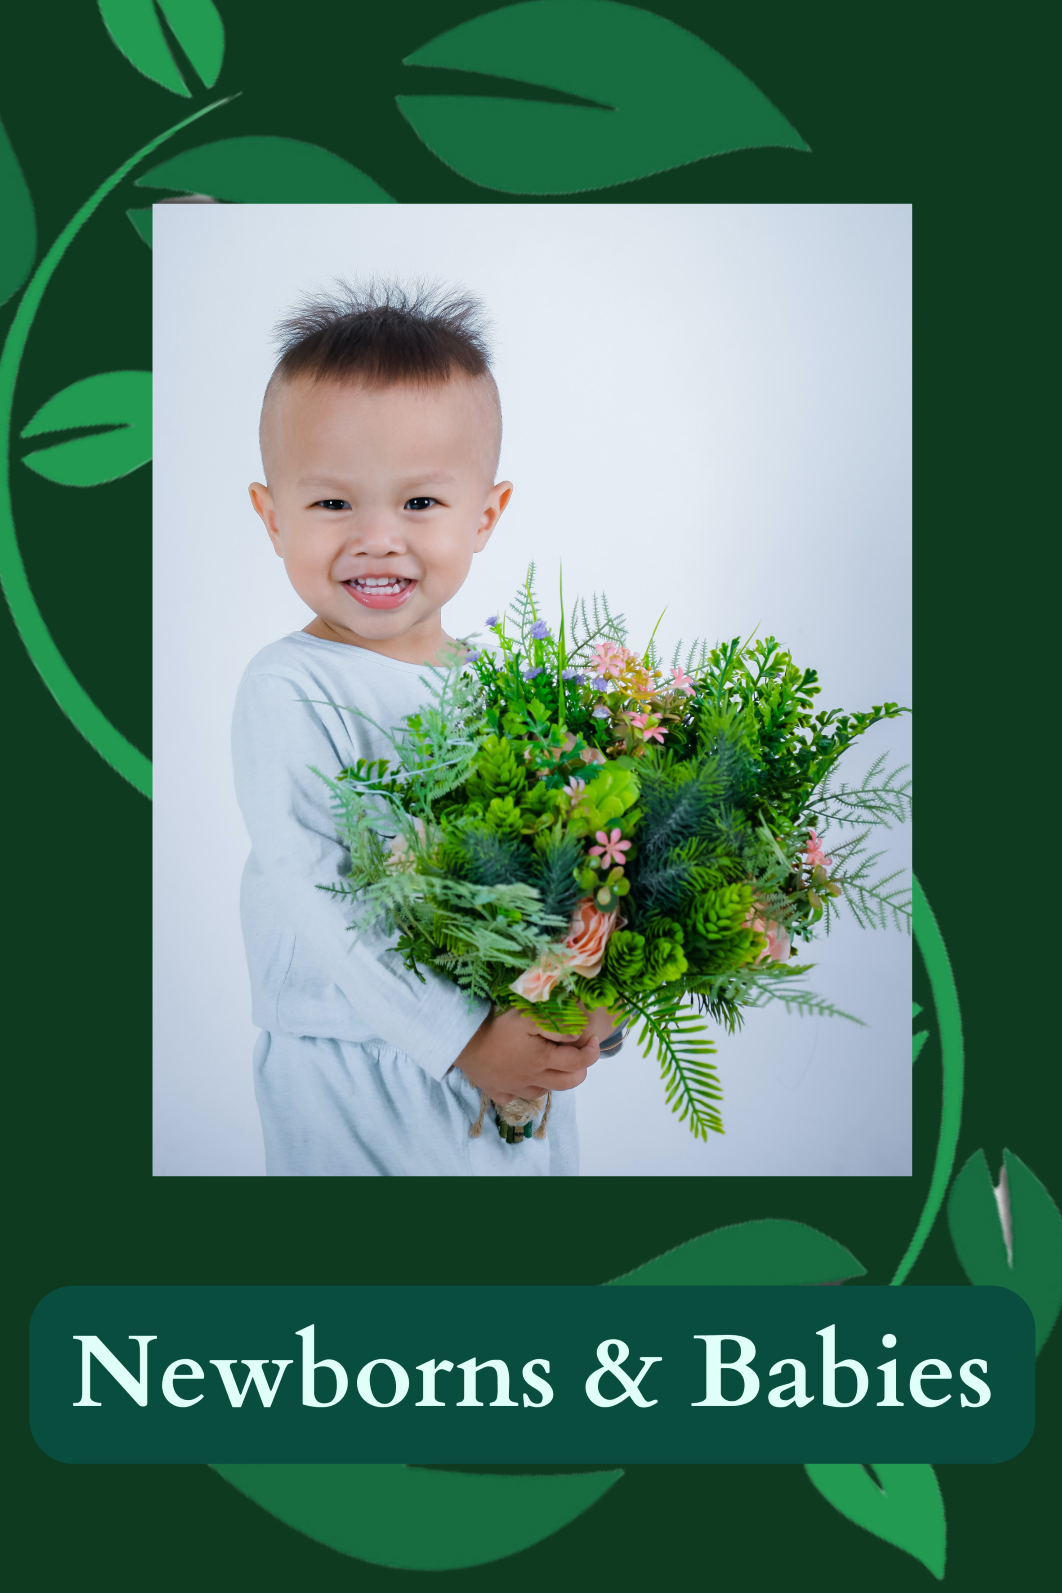 A toddler holding a bouquet of fern fronds and flowers